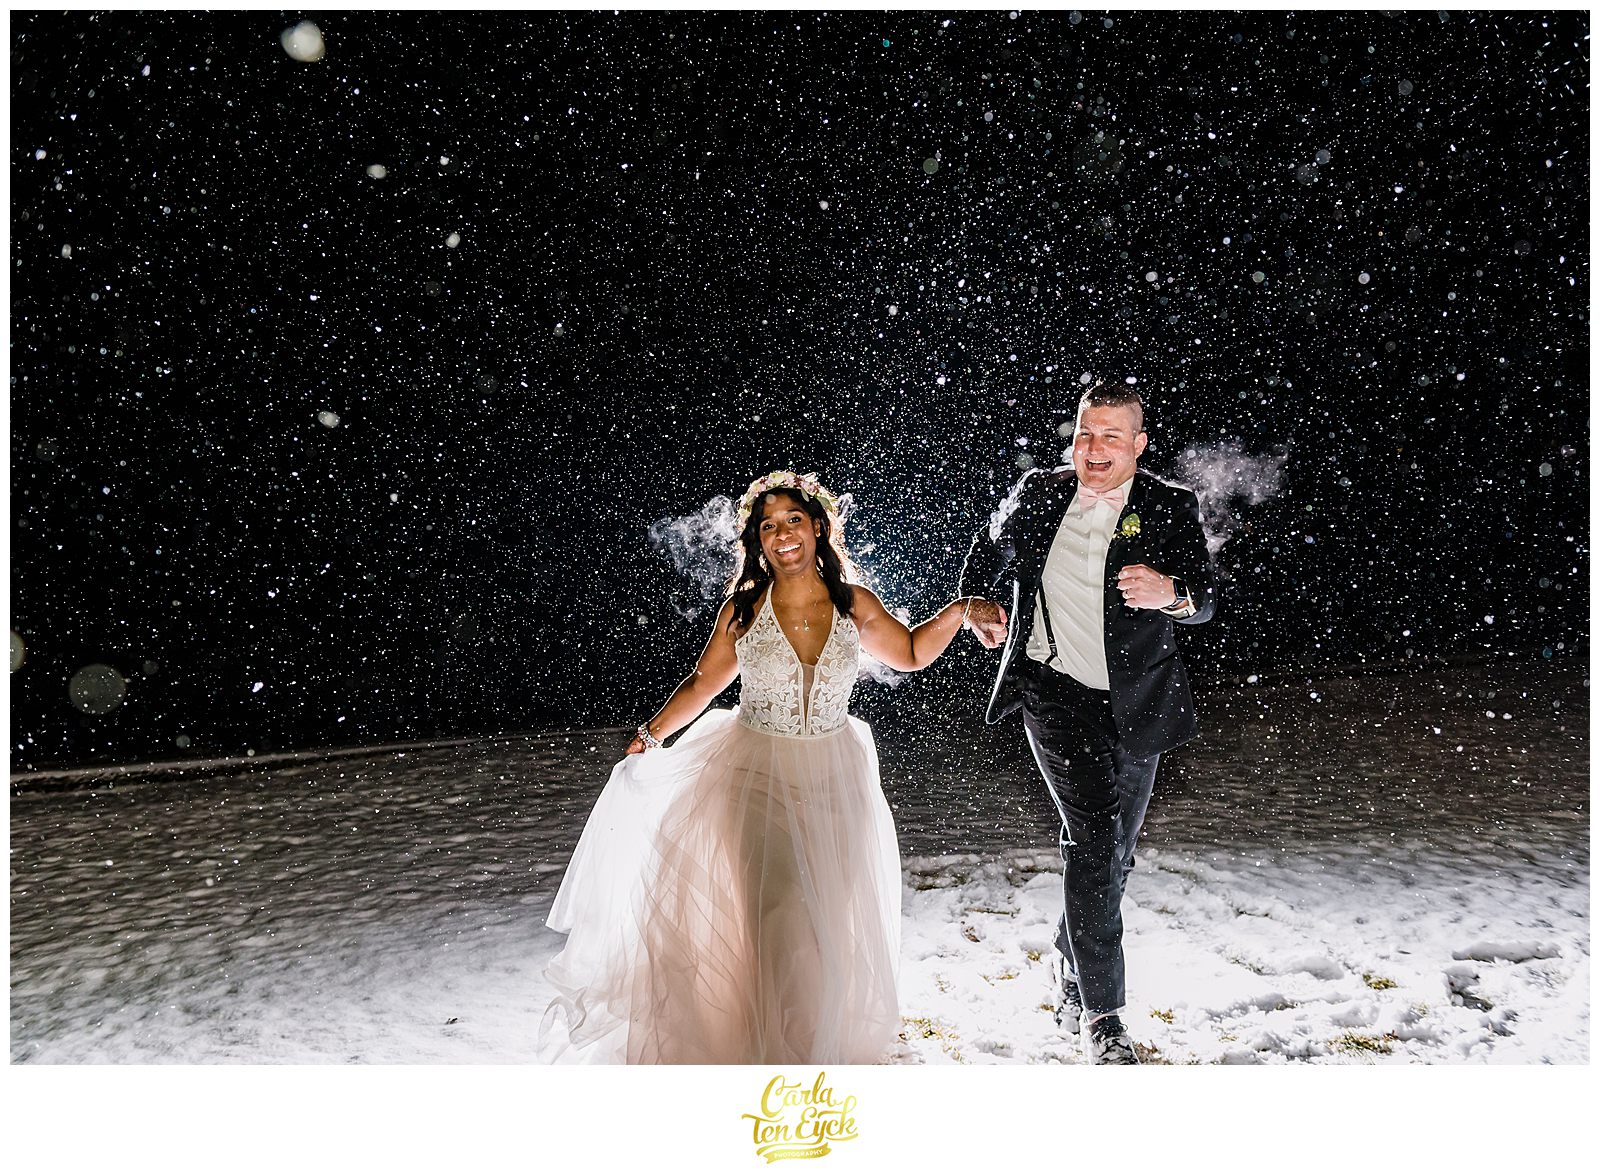 A bride and groom dance in the snow during their Pavillion at Crystal Lake wedding in Middletown CT